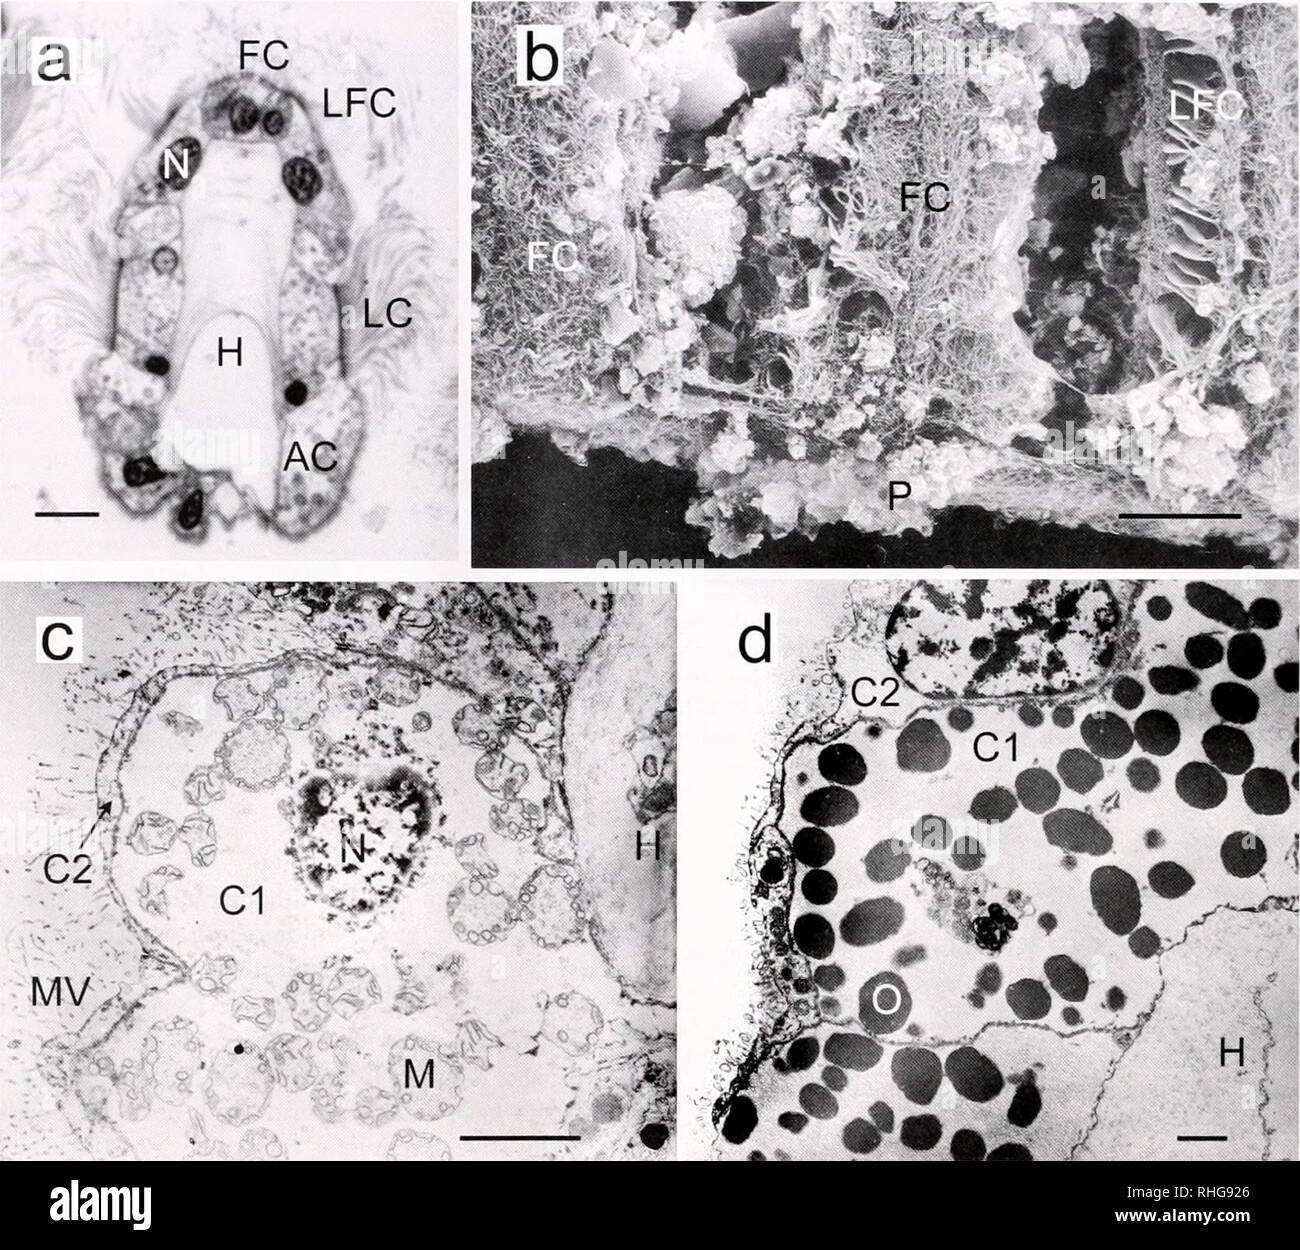 . The Biological bulletin. Biology; Zoology; Biology; Marine Biology. 206 S. C. DUFOUR 1. Figure 3. Light and electron micrographs of Type 2 gill filaments, (a) Thyusira (Parathyasira) equalis. Light micrograph of a semi-thin, transverse section of a gill filament, showing frontal cilia (FC). laterot'rontal cirri (LFCl, lateral cilia (LC). hemocoel (H), and abfrontal cells (AC). N. nucleus, (b) Atloniorhinii cclia. SEM of the ventral extremity of three gill filaments. Frontal cilia (FC) and laterofrontal cirri (LFC) are visible. Numerous particles can be seen on the frontal tracts, between fi Stock Photo